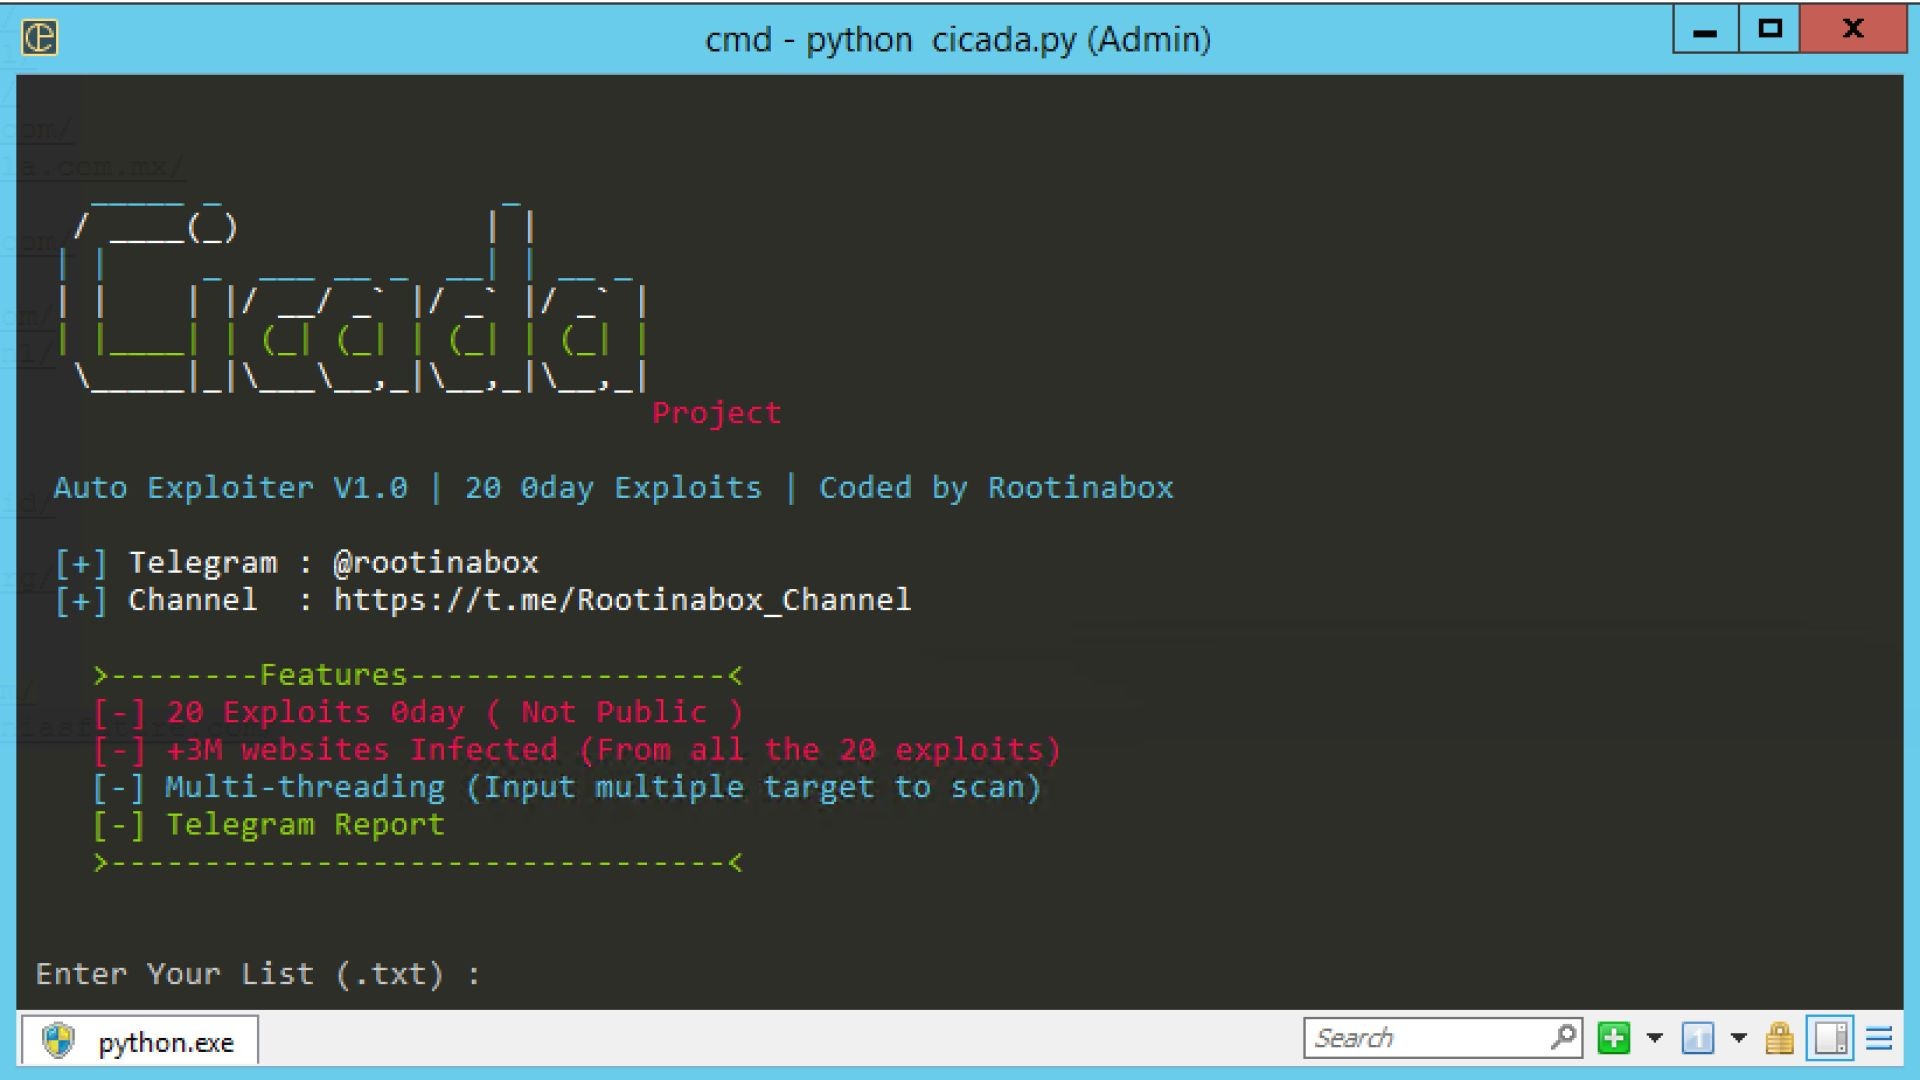 [New] Cicada Project - exploit rce upload shell +20 exploit get + 3000 shell In 2 minutes 2023 priv8